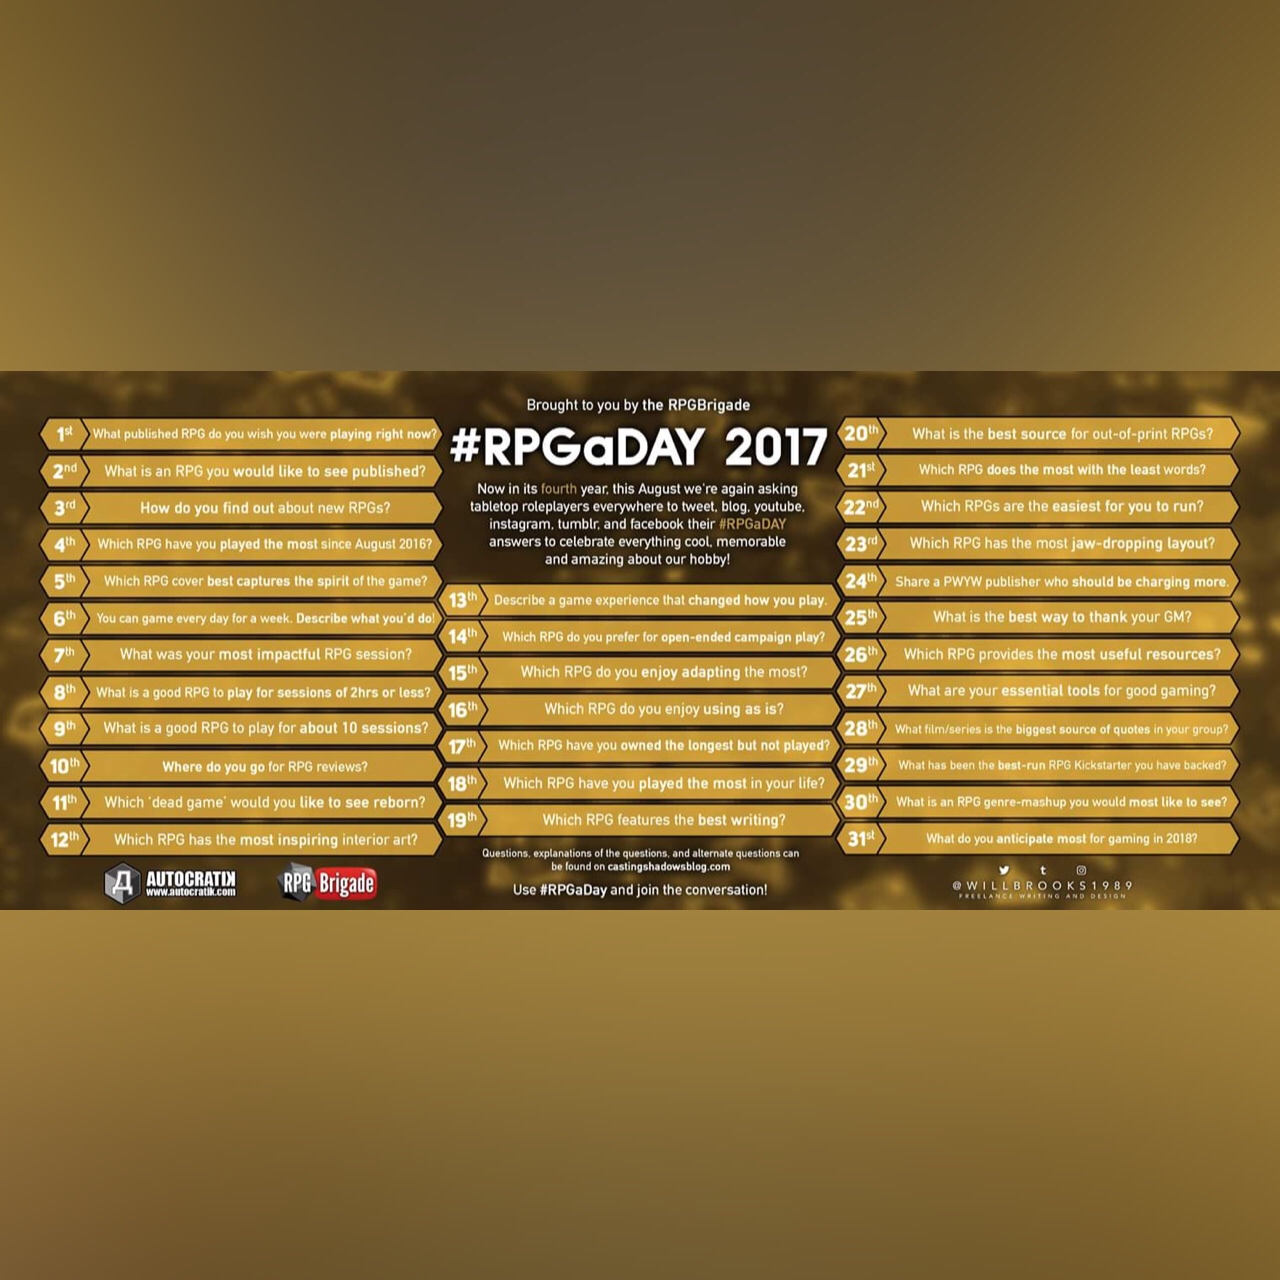 RPGaDAY 2017 August 4th Which RPG have you played the most since August 2017?